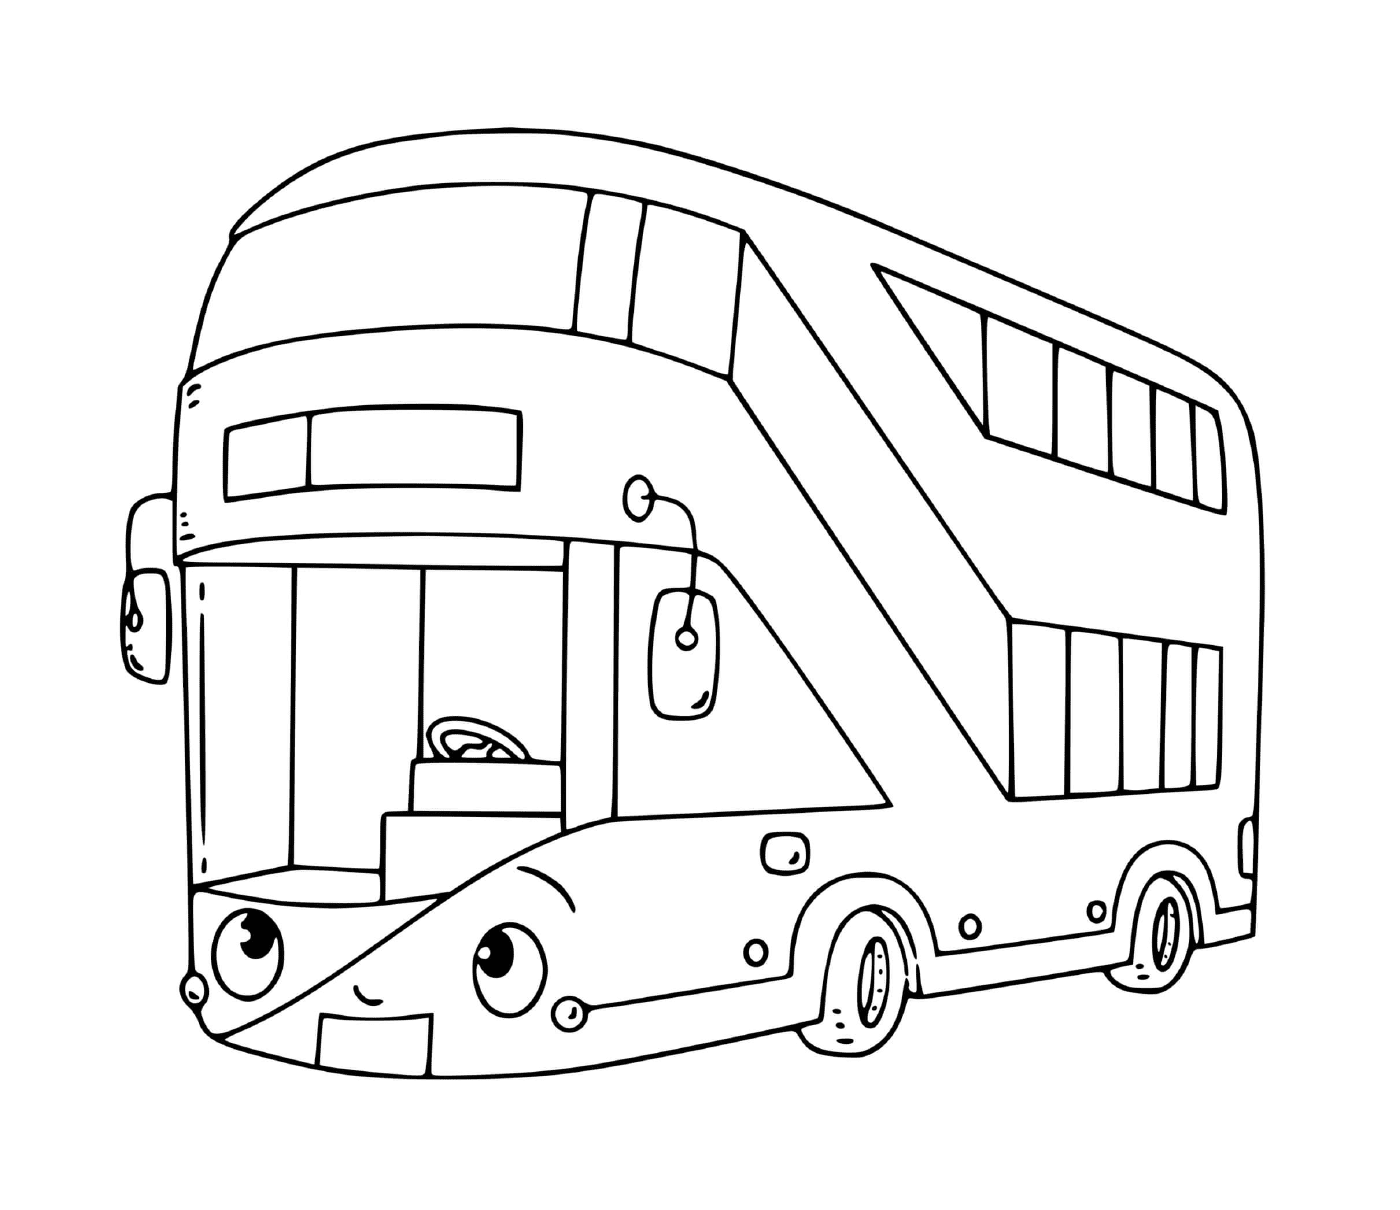  A two-storey bus for transportation 